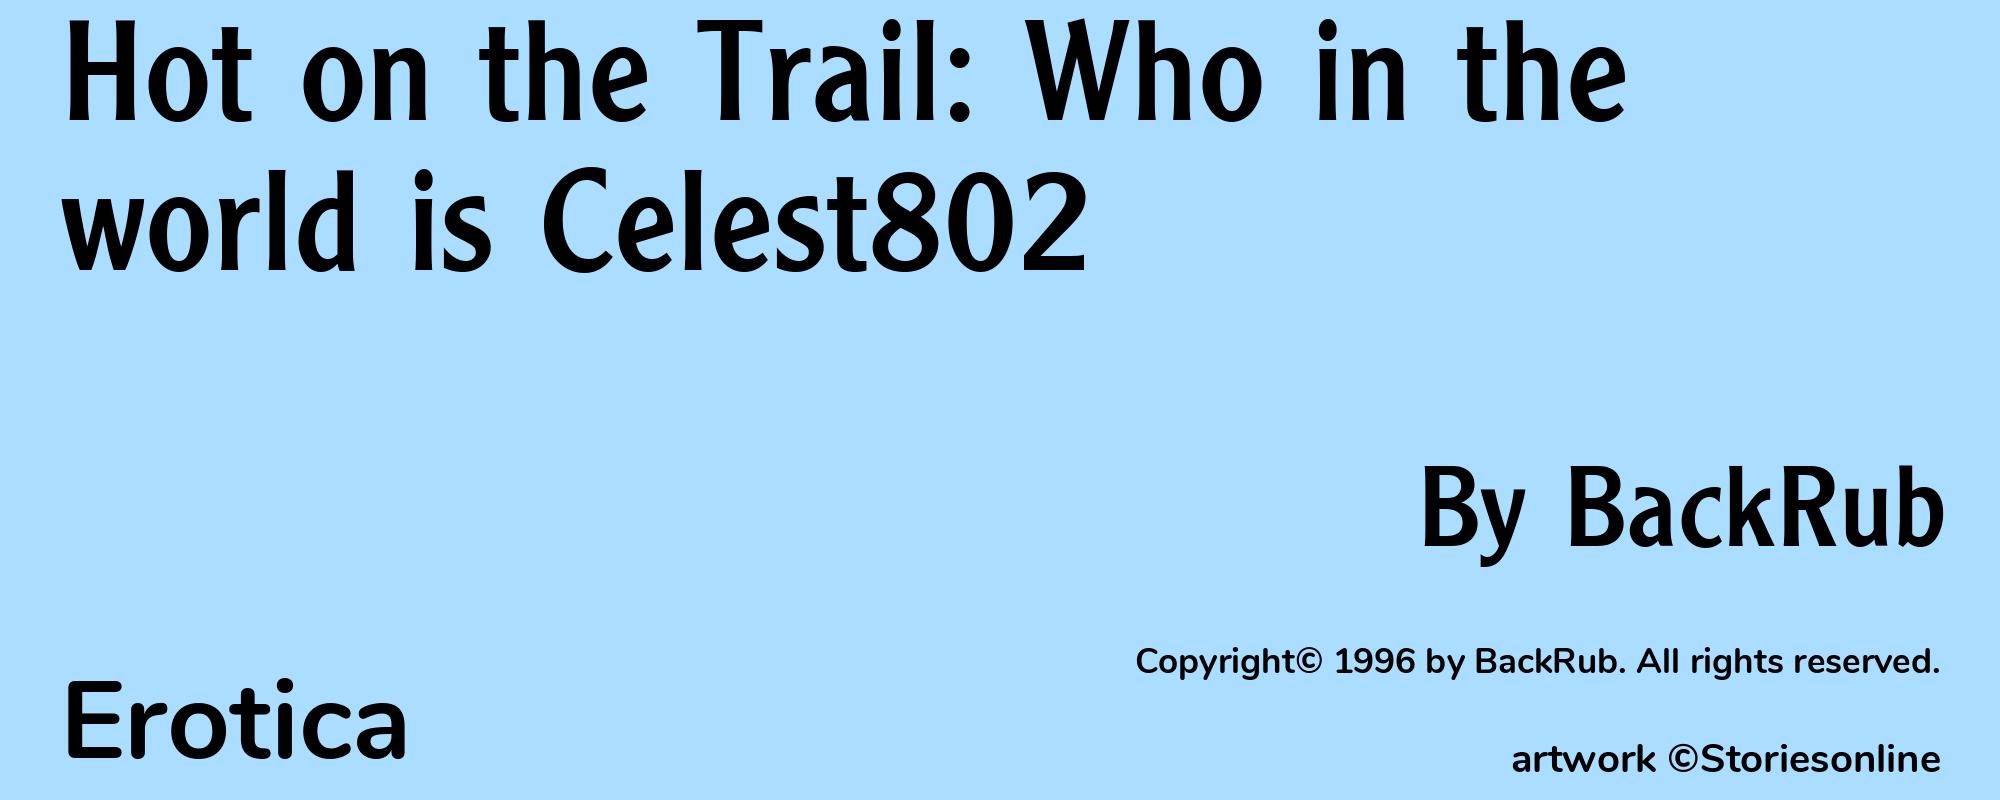 Hot on the Trail: Who in the world is Celest802 - Cover